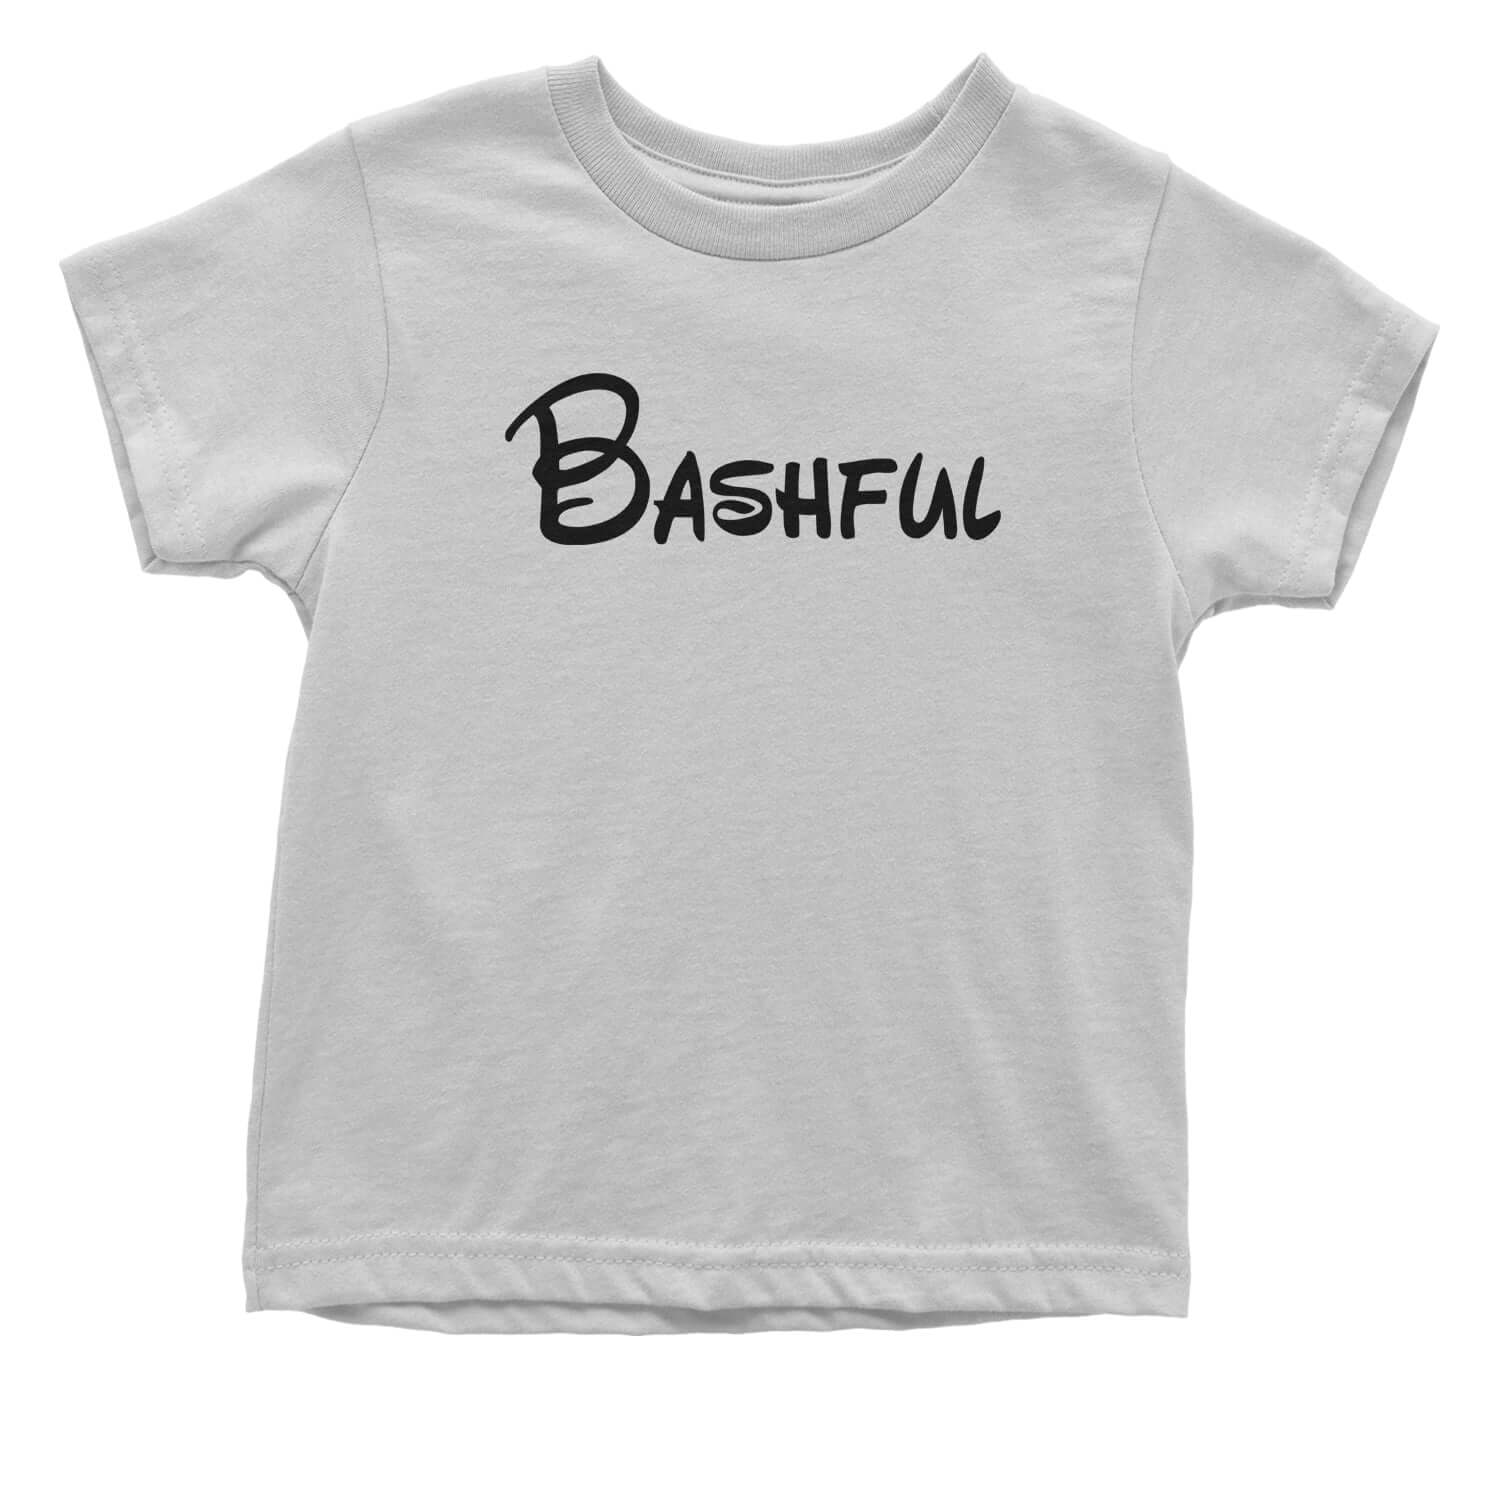 Bashful - 7 Dwarfs Costume Toddler T-Shirt and, costume, dwarfs, group, halloween, matching, seven, snow, the, white by Expression Tees